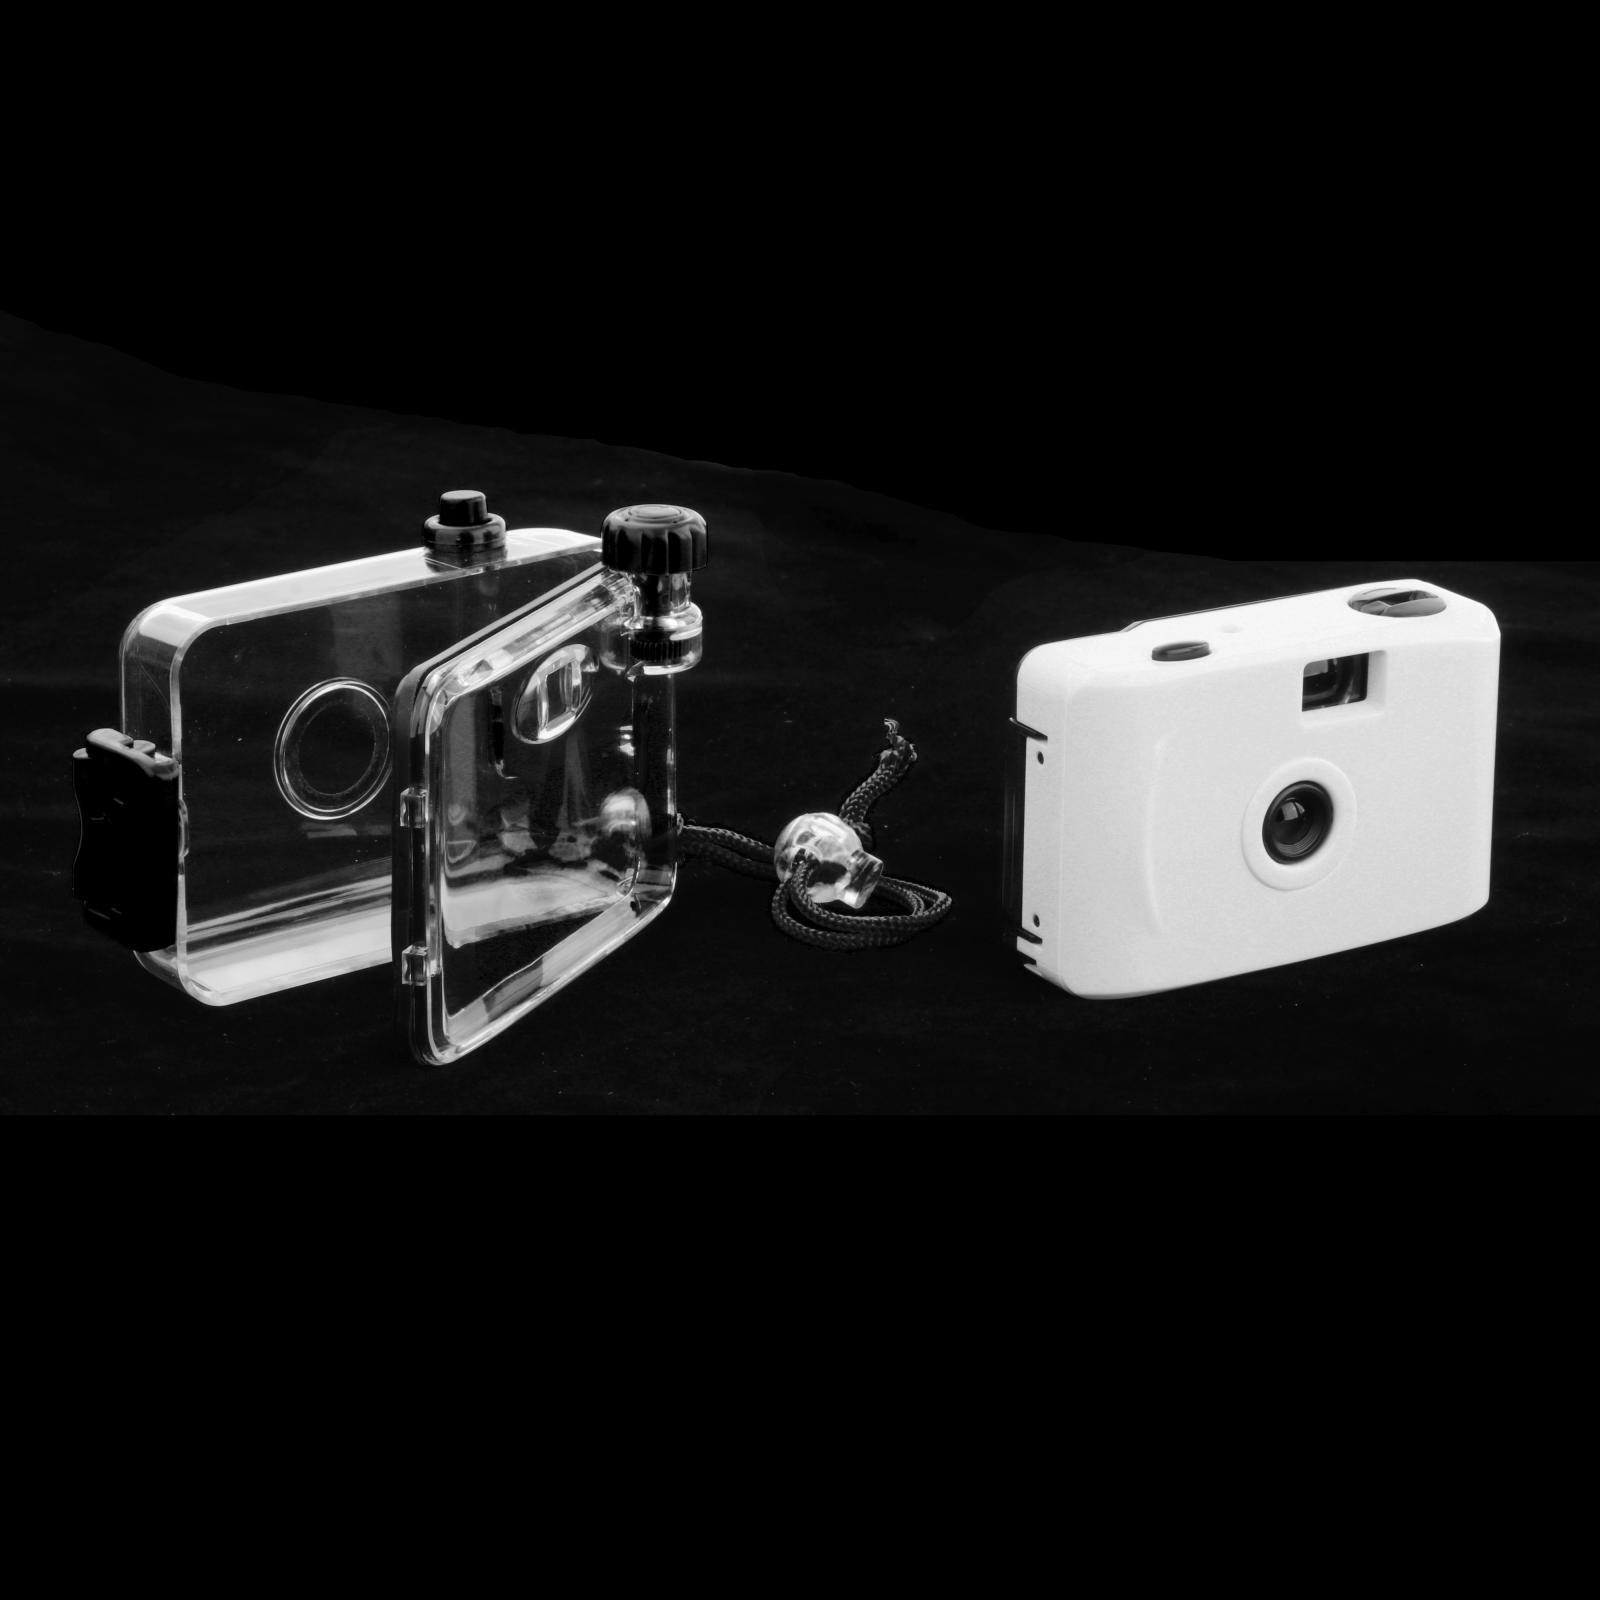 Compact Mini Camera Cute 35mm Film Parts for Photography Surfing Black Case